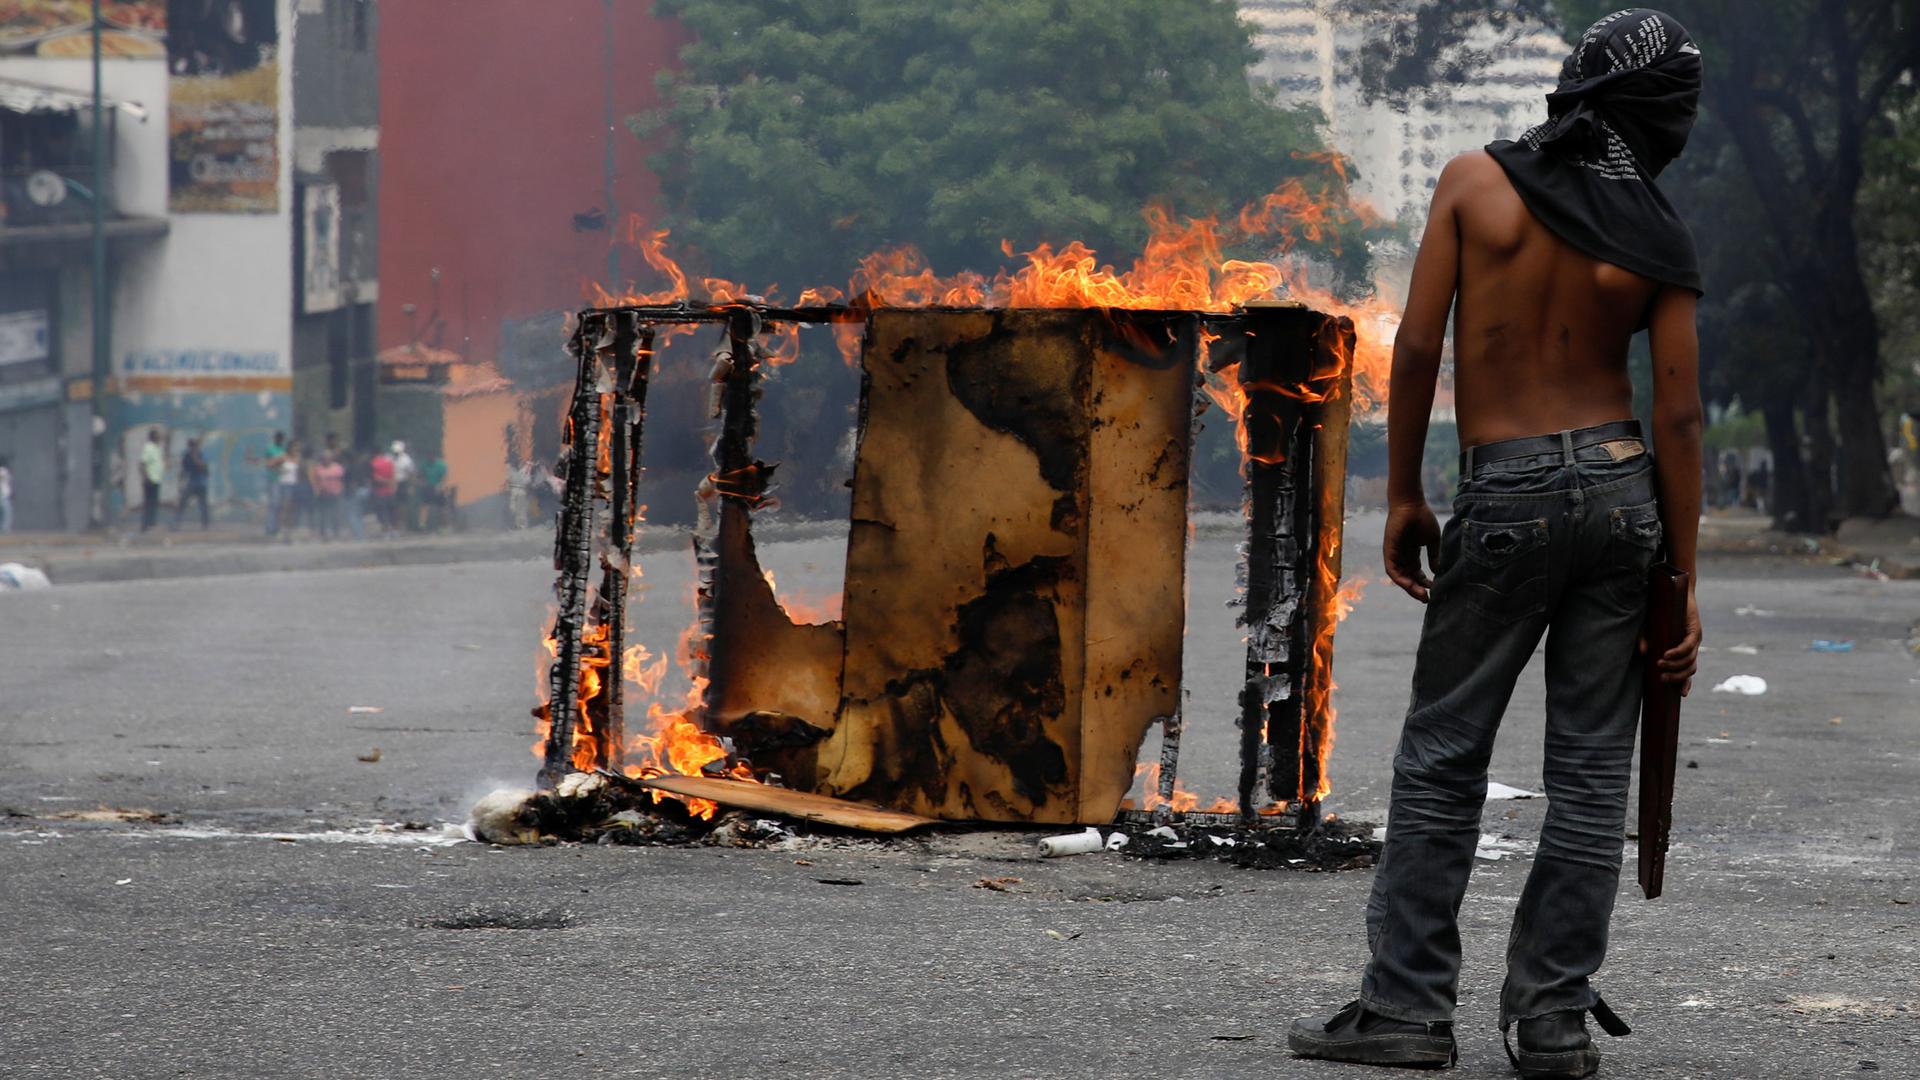 A demonstrator stands shirtless nex to a mostly burned rectangular frame during a protest .